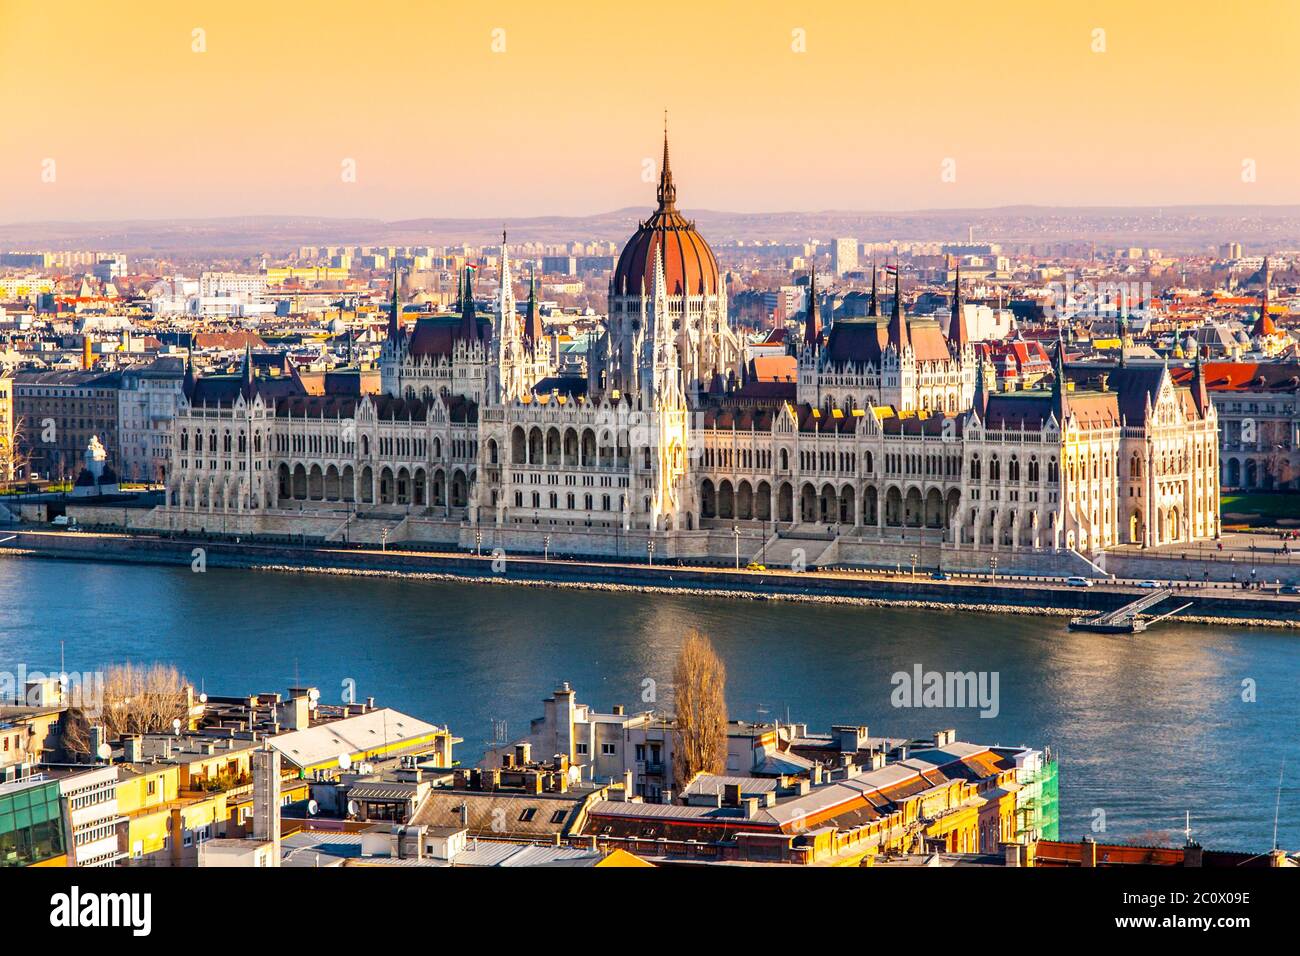 Hungarian Parliament, aka Orszaghaz, historical building on Danube riverbank in the centre of Budapest, Hungary, Europe. UNESCO World Heritage Site. Stock Photo